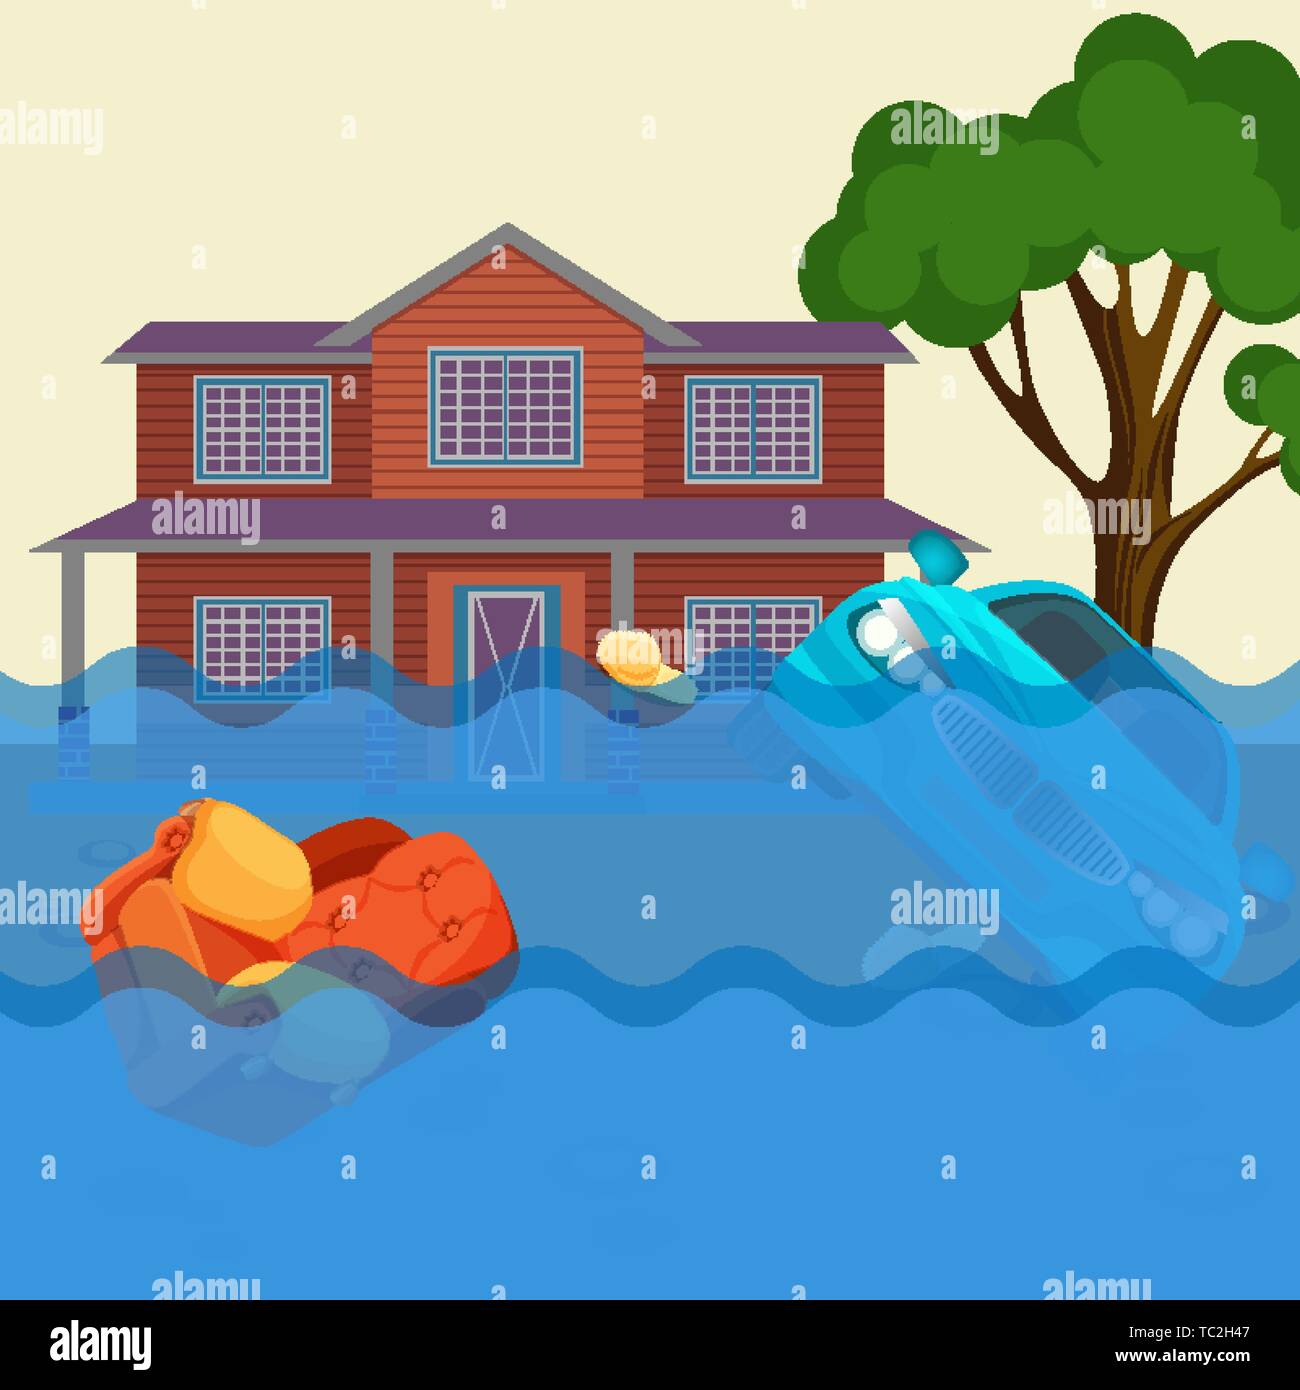 Flood realistic natural disaster vector illustration. Cottage house, car, trees Stock Vector